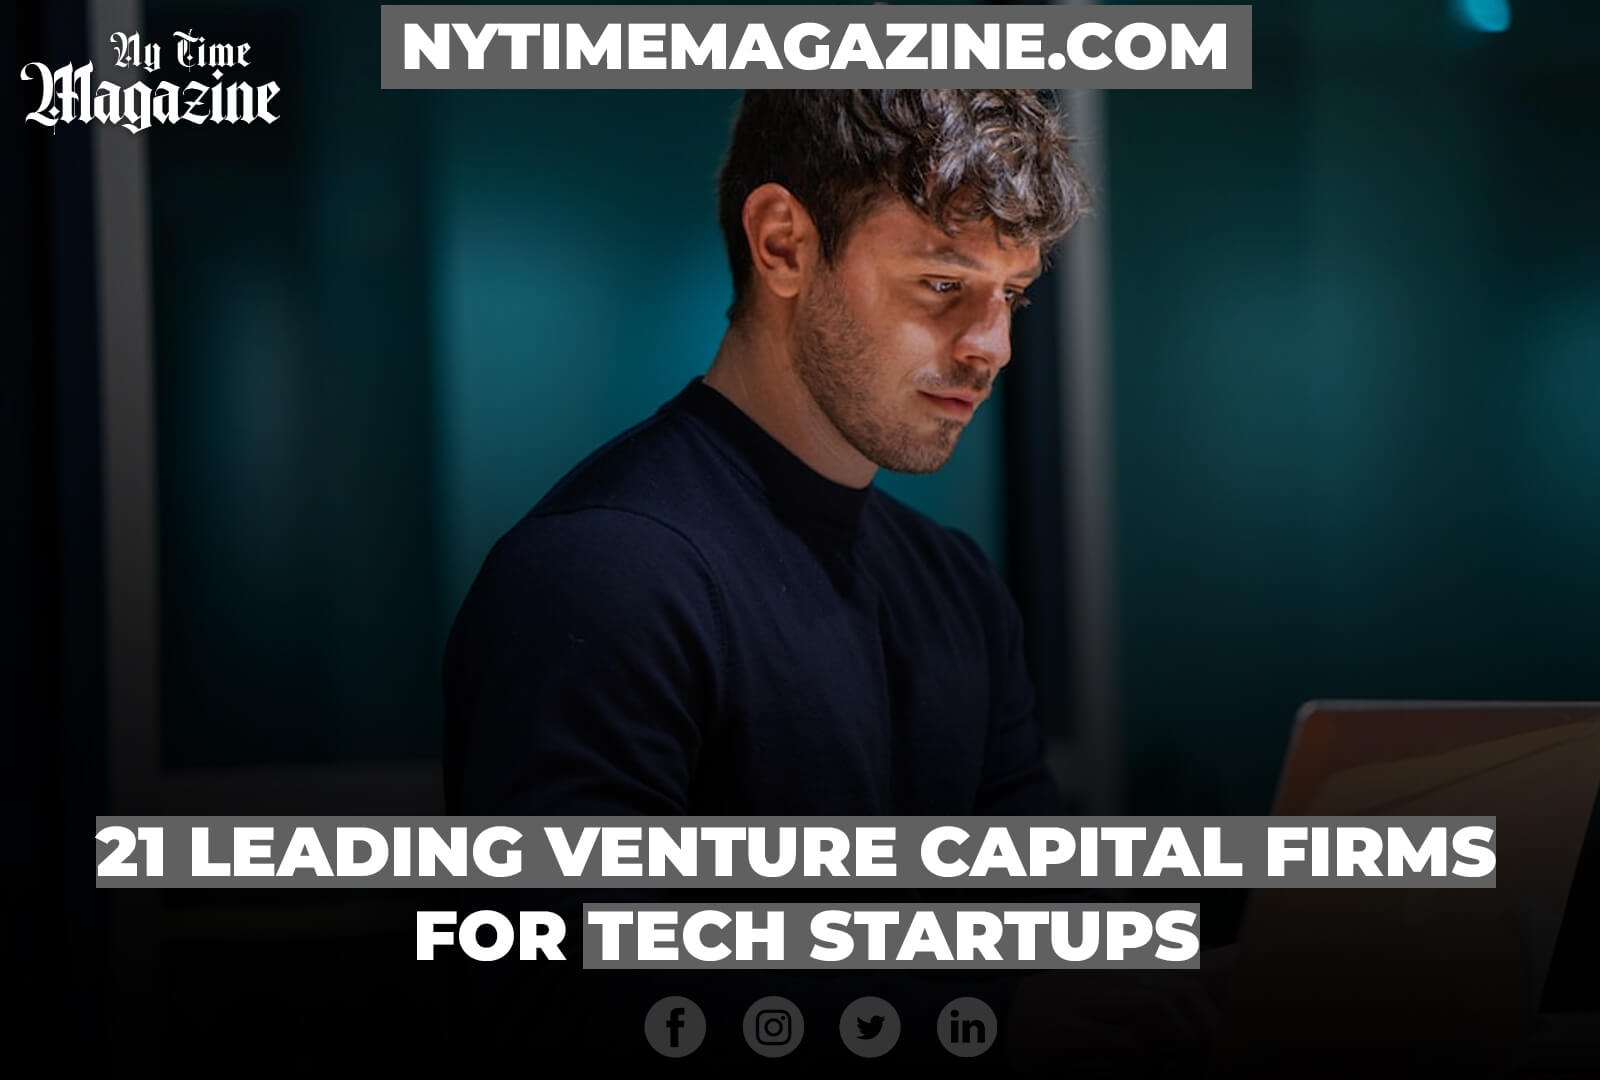 21 Leading Venture Capital Firms for Tech Startups